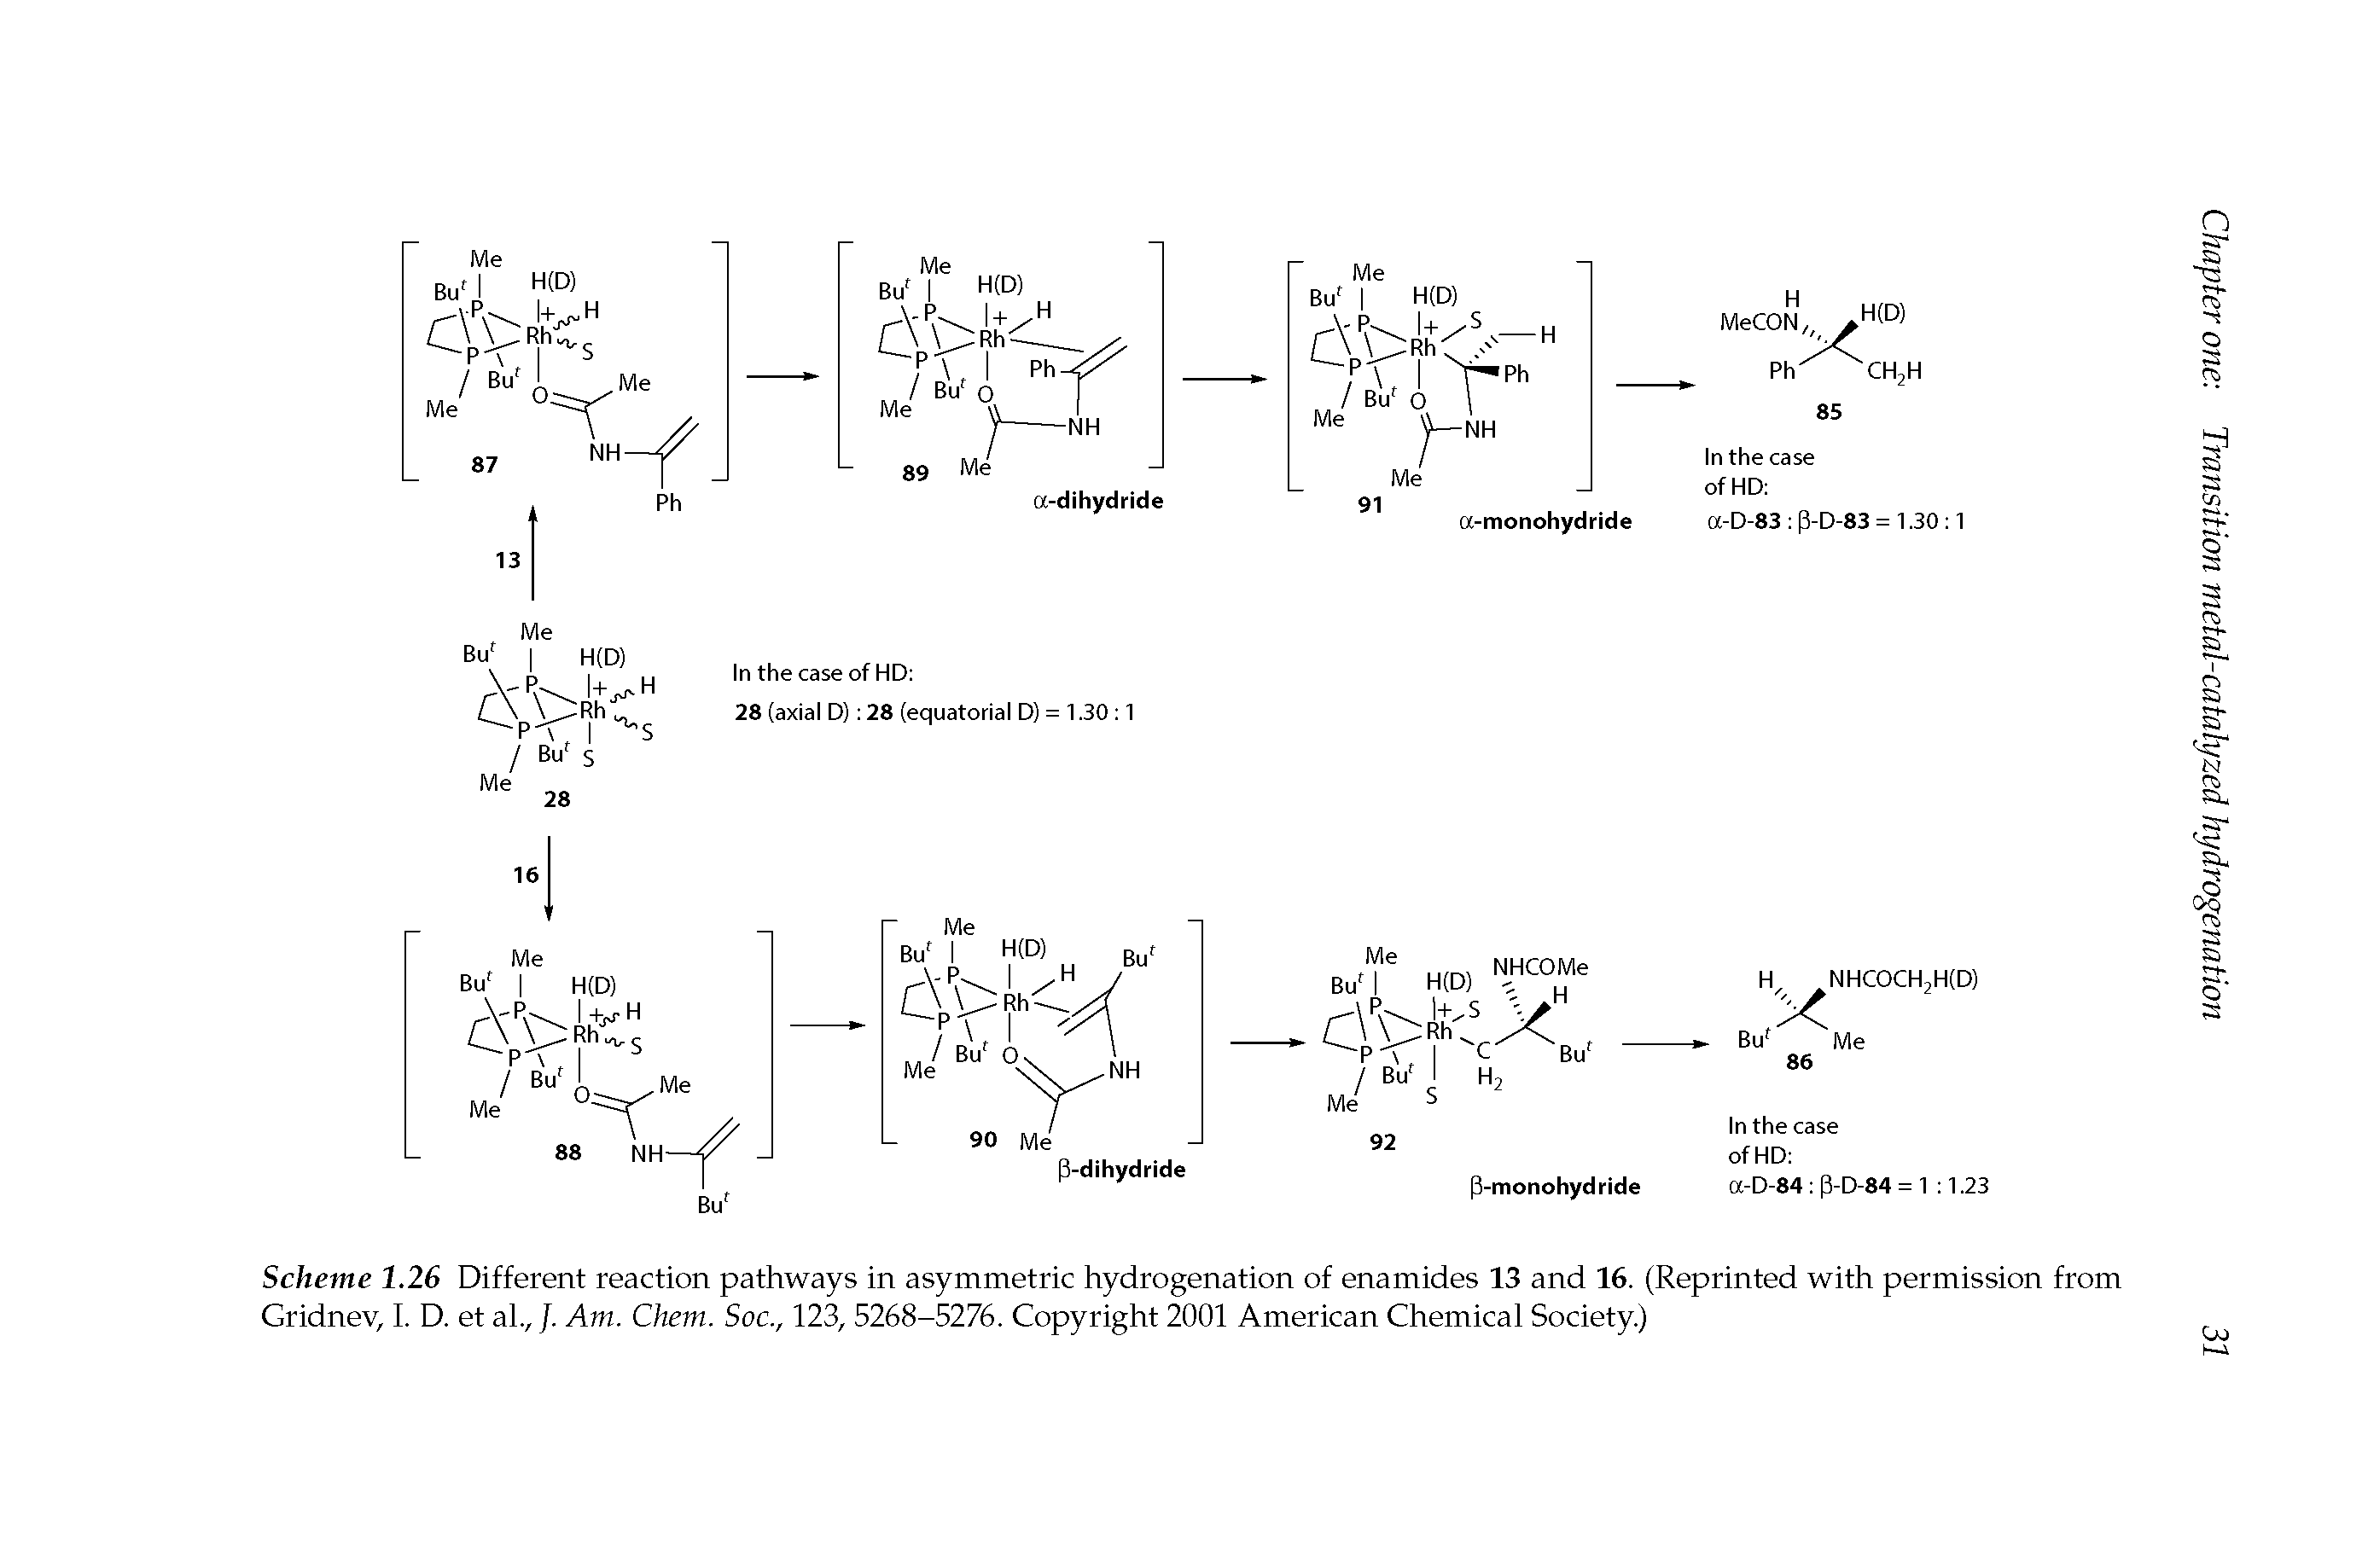 Scheme 1.26 Different reaction pathways in asymmetric hydrogenation of enamides 13 and 16. (Reprinted with permission from Gridnev, I. D. et al.,/. Am. Chem. Soc., 123, 5268-5276. Copyright 2001 American Chemical Society.)...